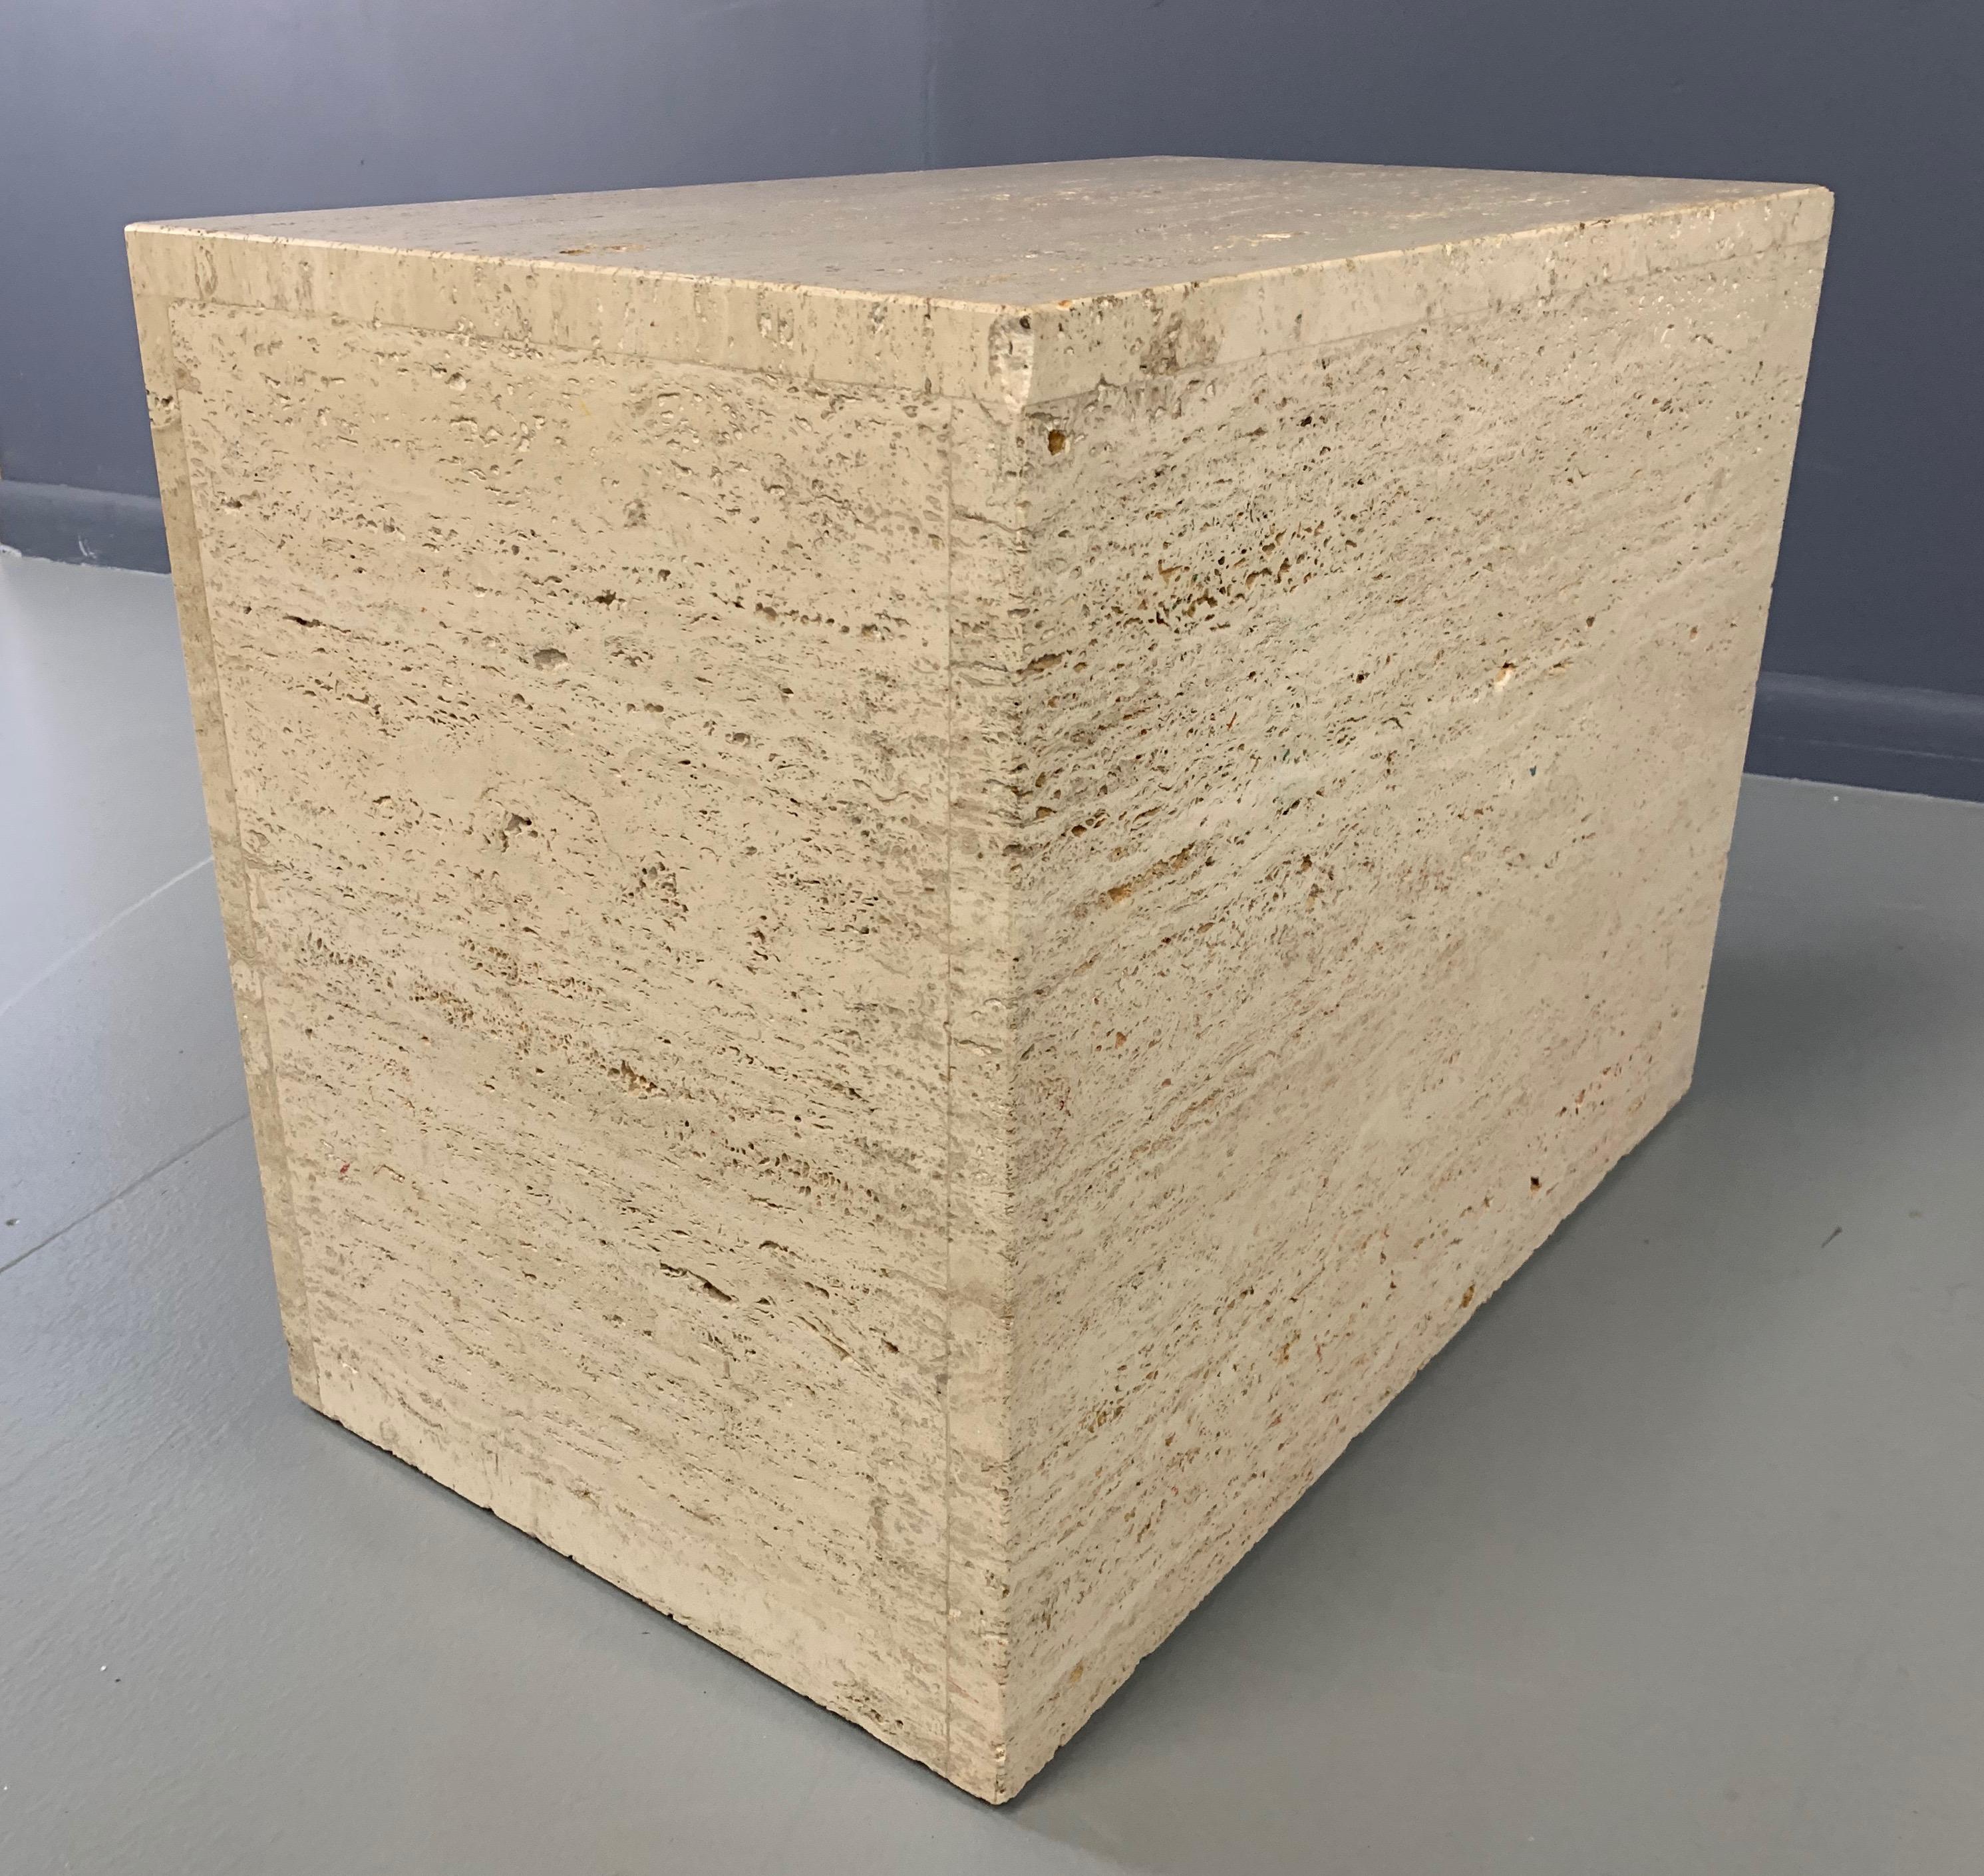 This lovely unhoned travertine side table will work in many configurations and styles of design.